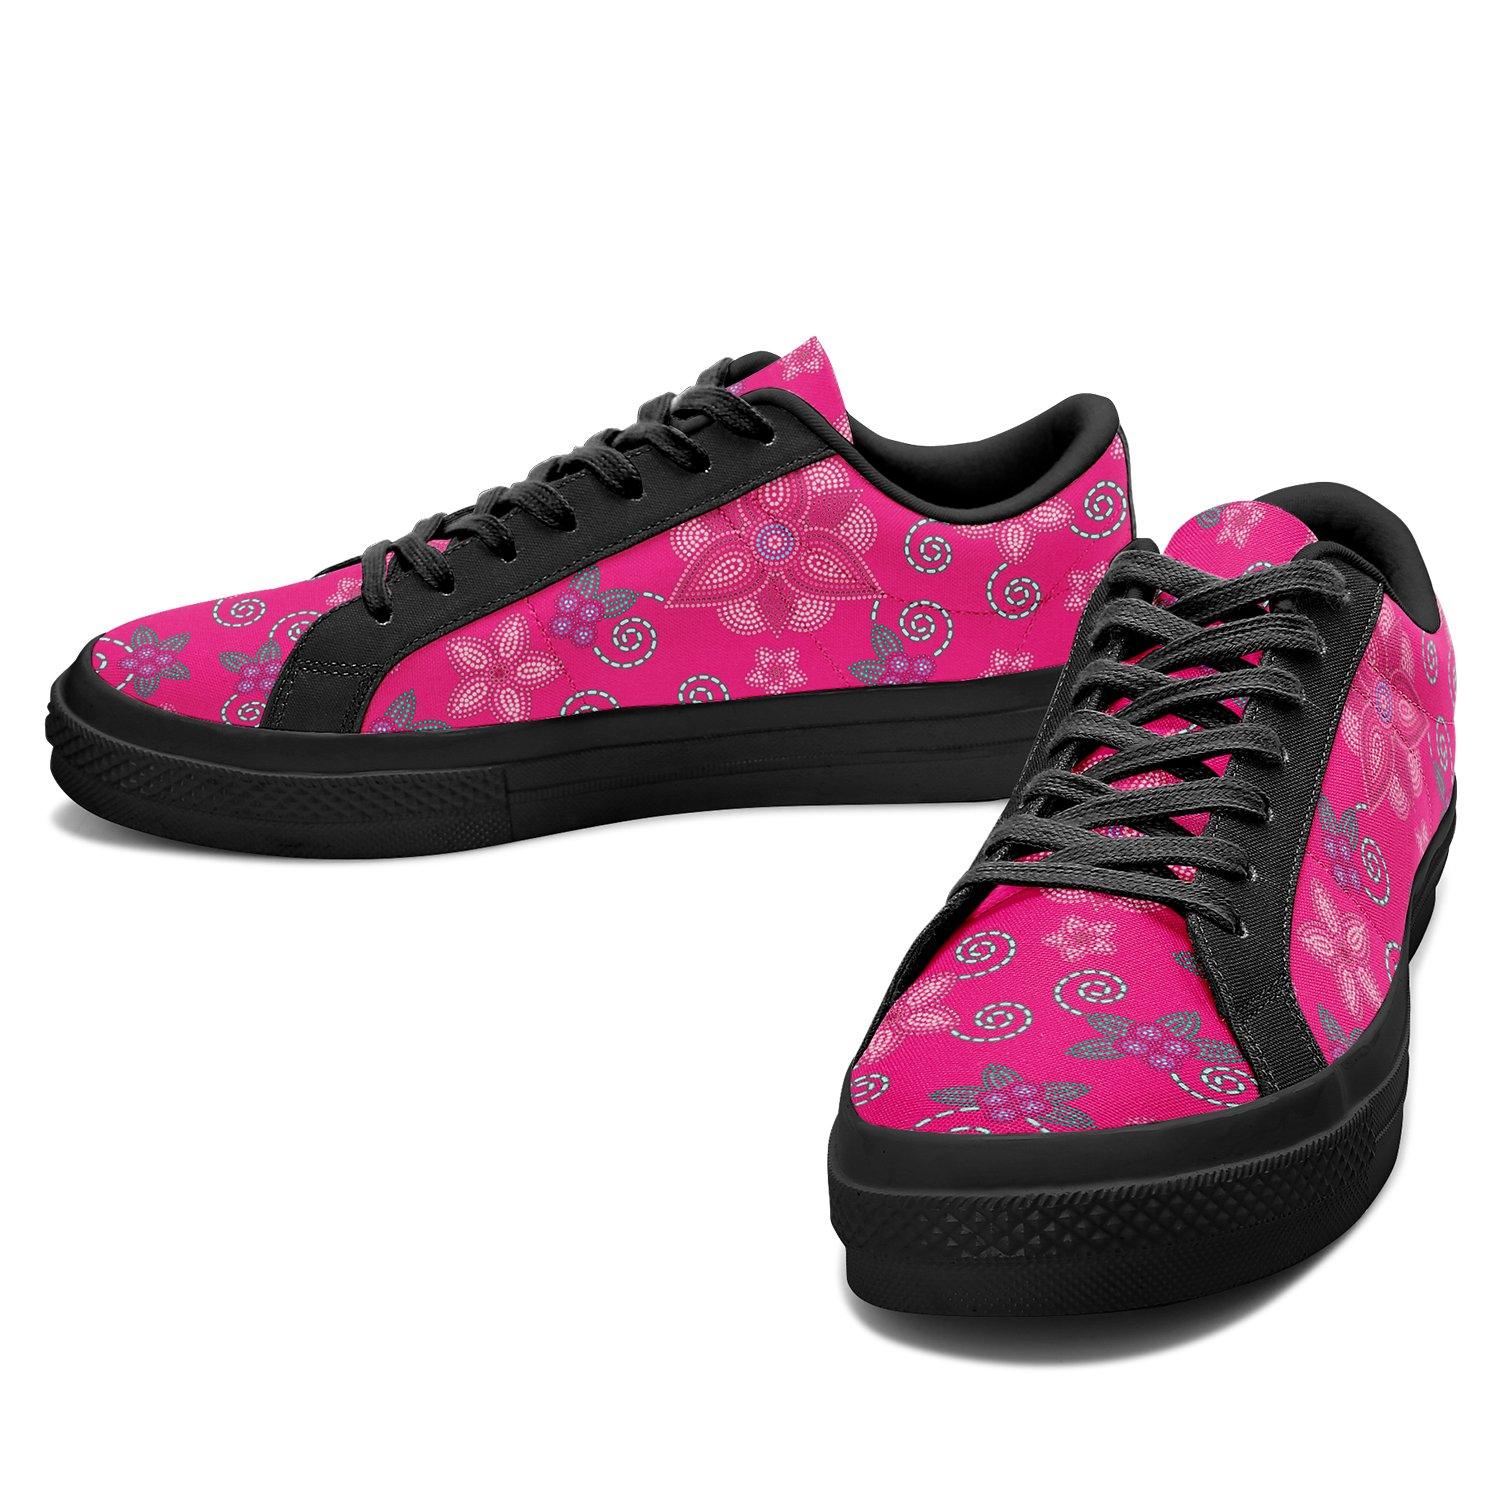 Berry Picking Pink Aapisi Low Top Canvas Shoes Black Sole aapisi Herman 